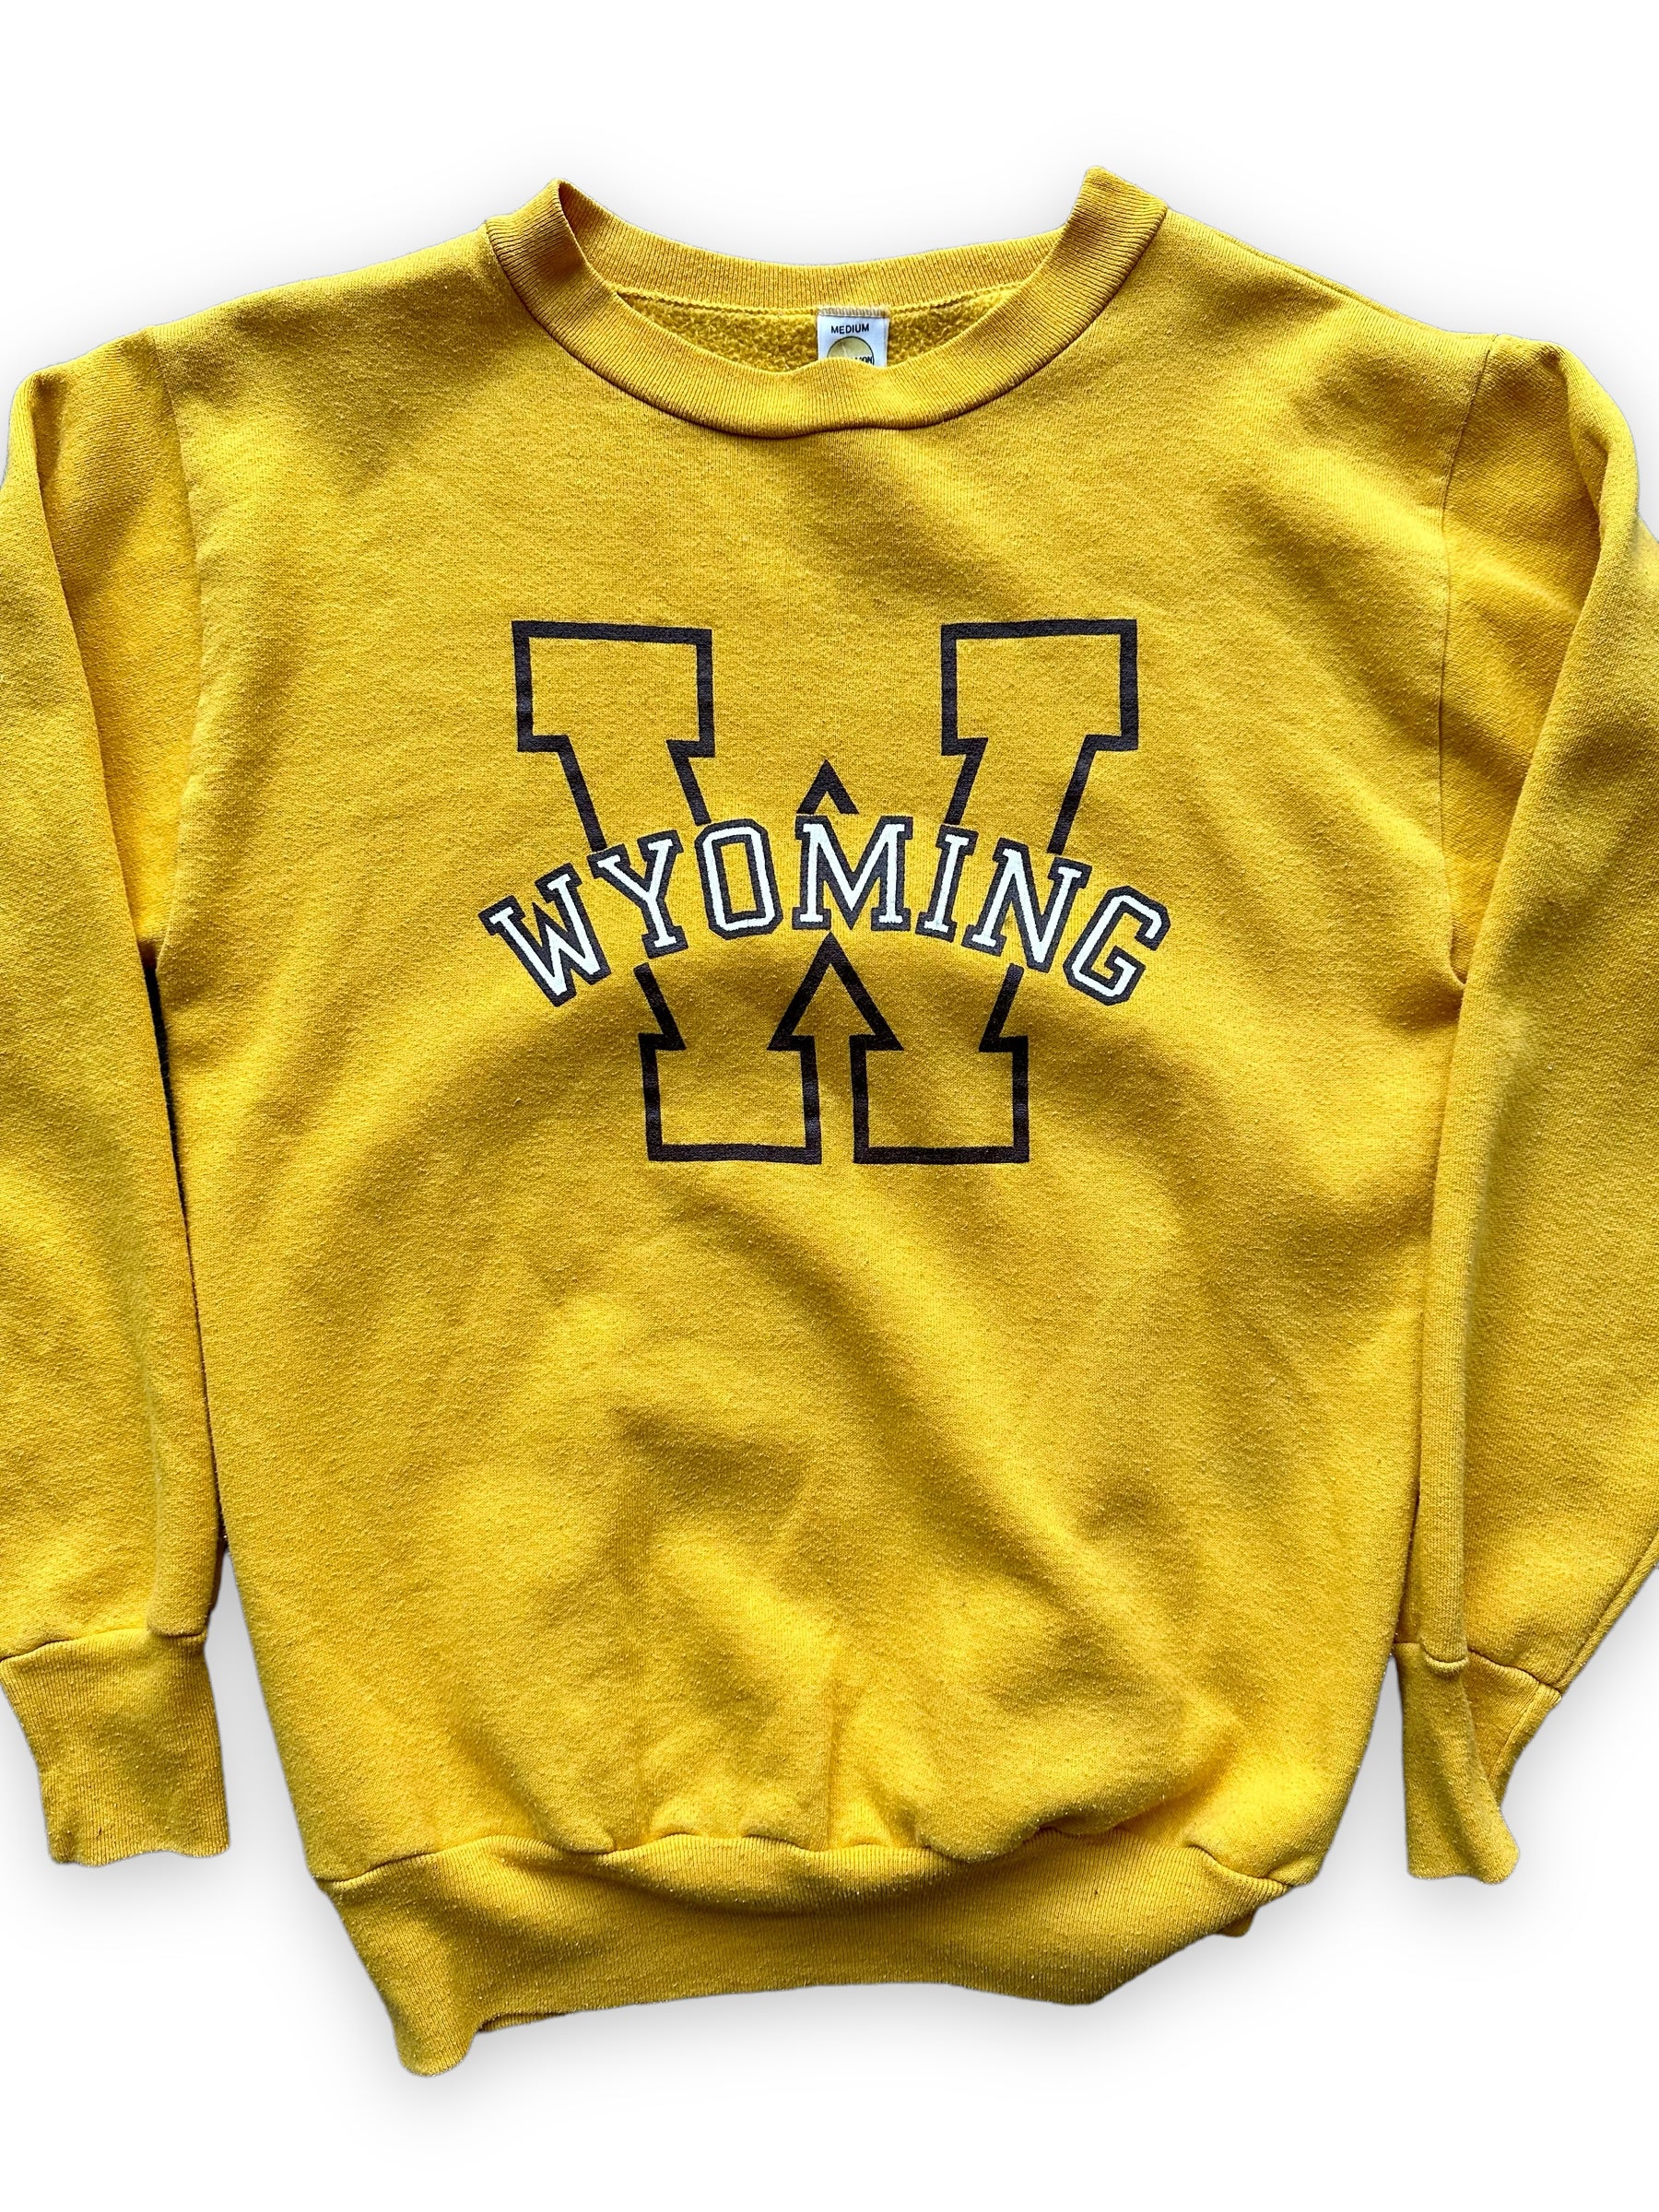 Detail Front View of Vintage Yellow Wyoming Crewneck Sweatshirt SZ M | Vintage Crewneck Sweatshirt Seattle | Barn Owl Vintage Seattle